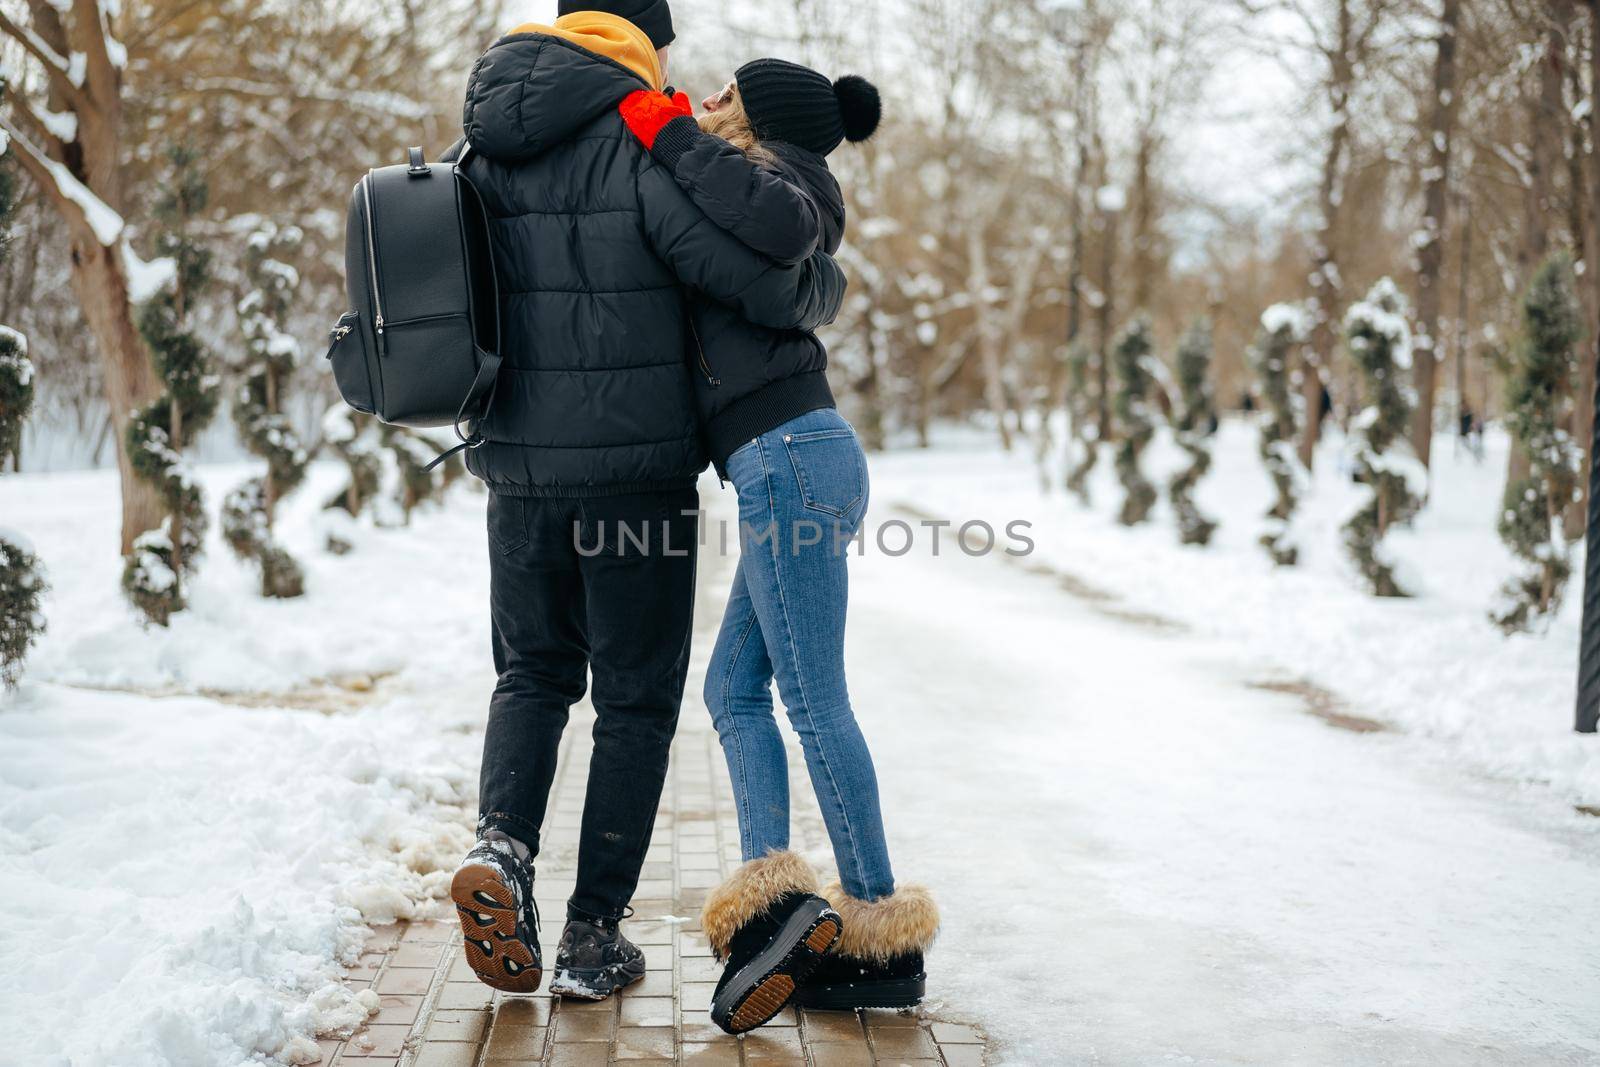 Young happy smiling couple in love having a walk in a winter park